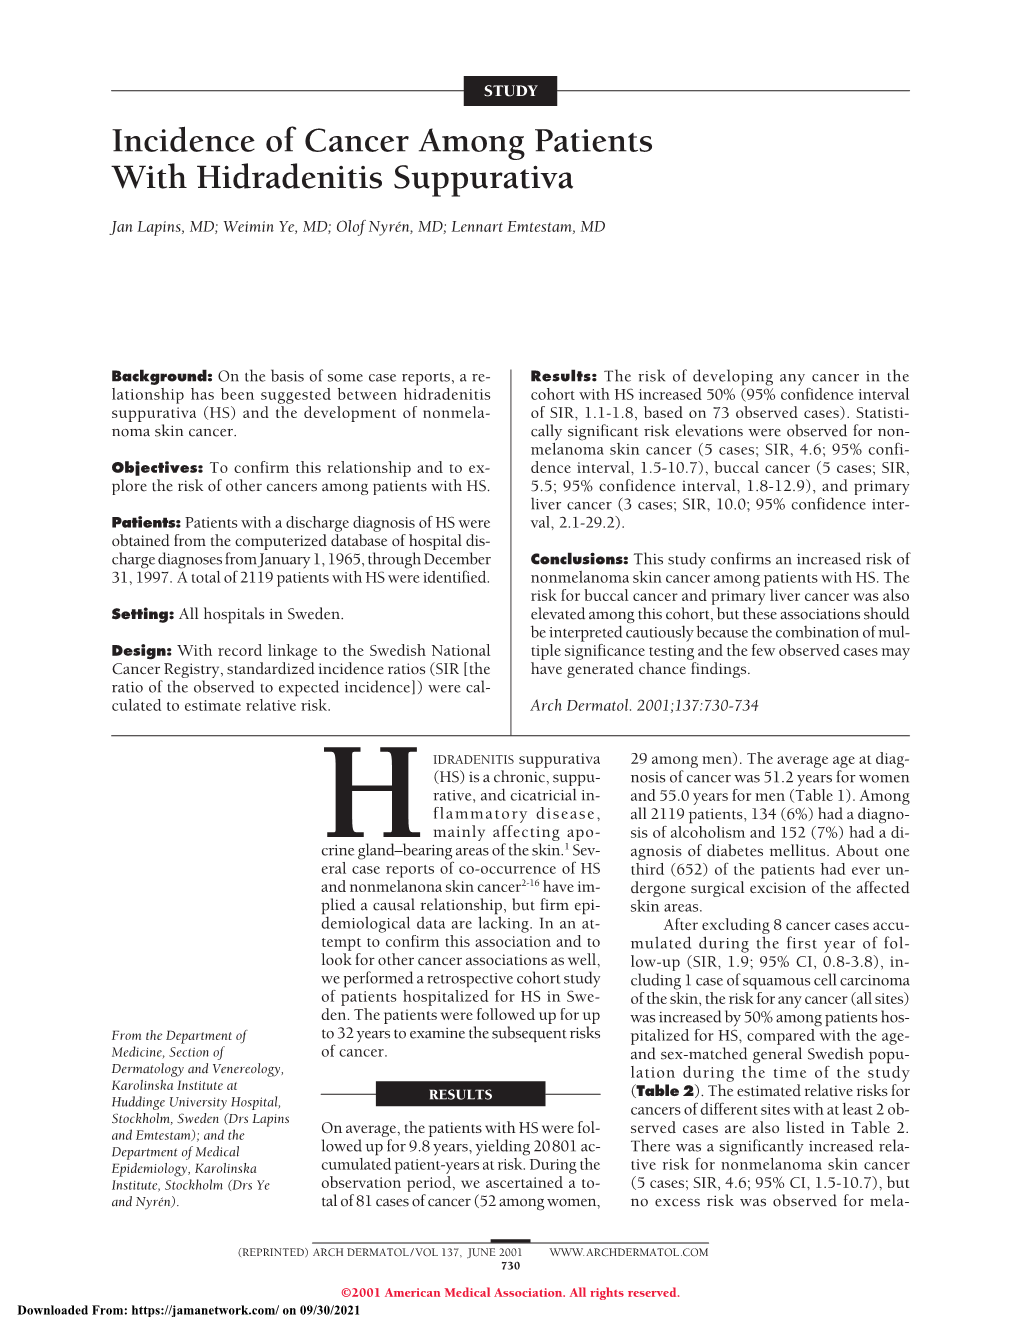 Incidence of Cancer Among Patients with Hidradenitis Suppurativa